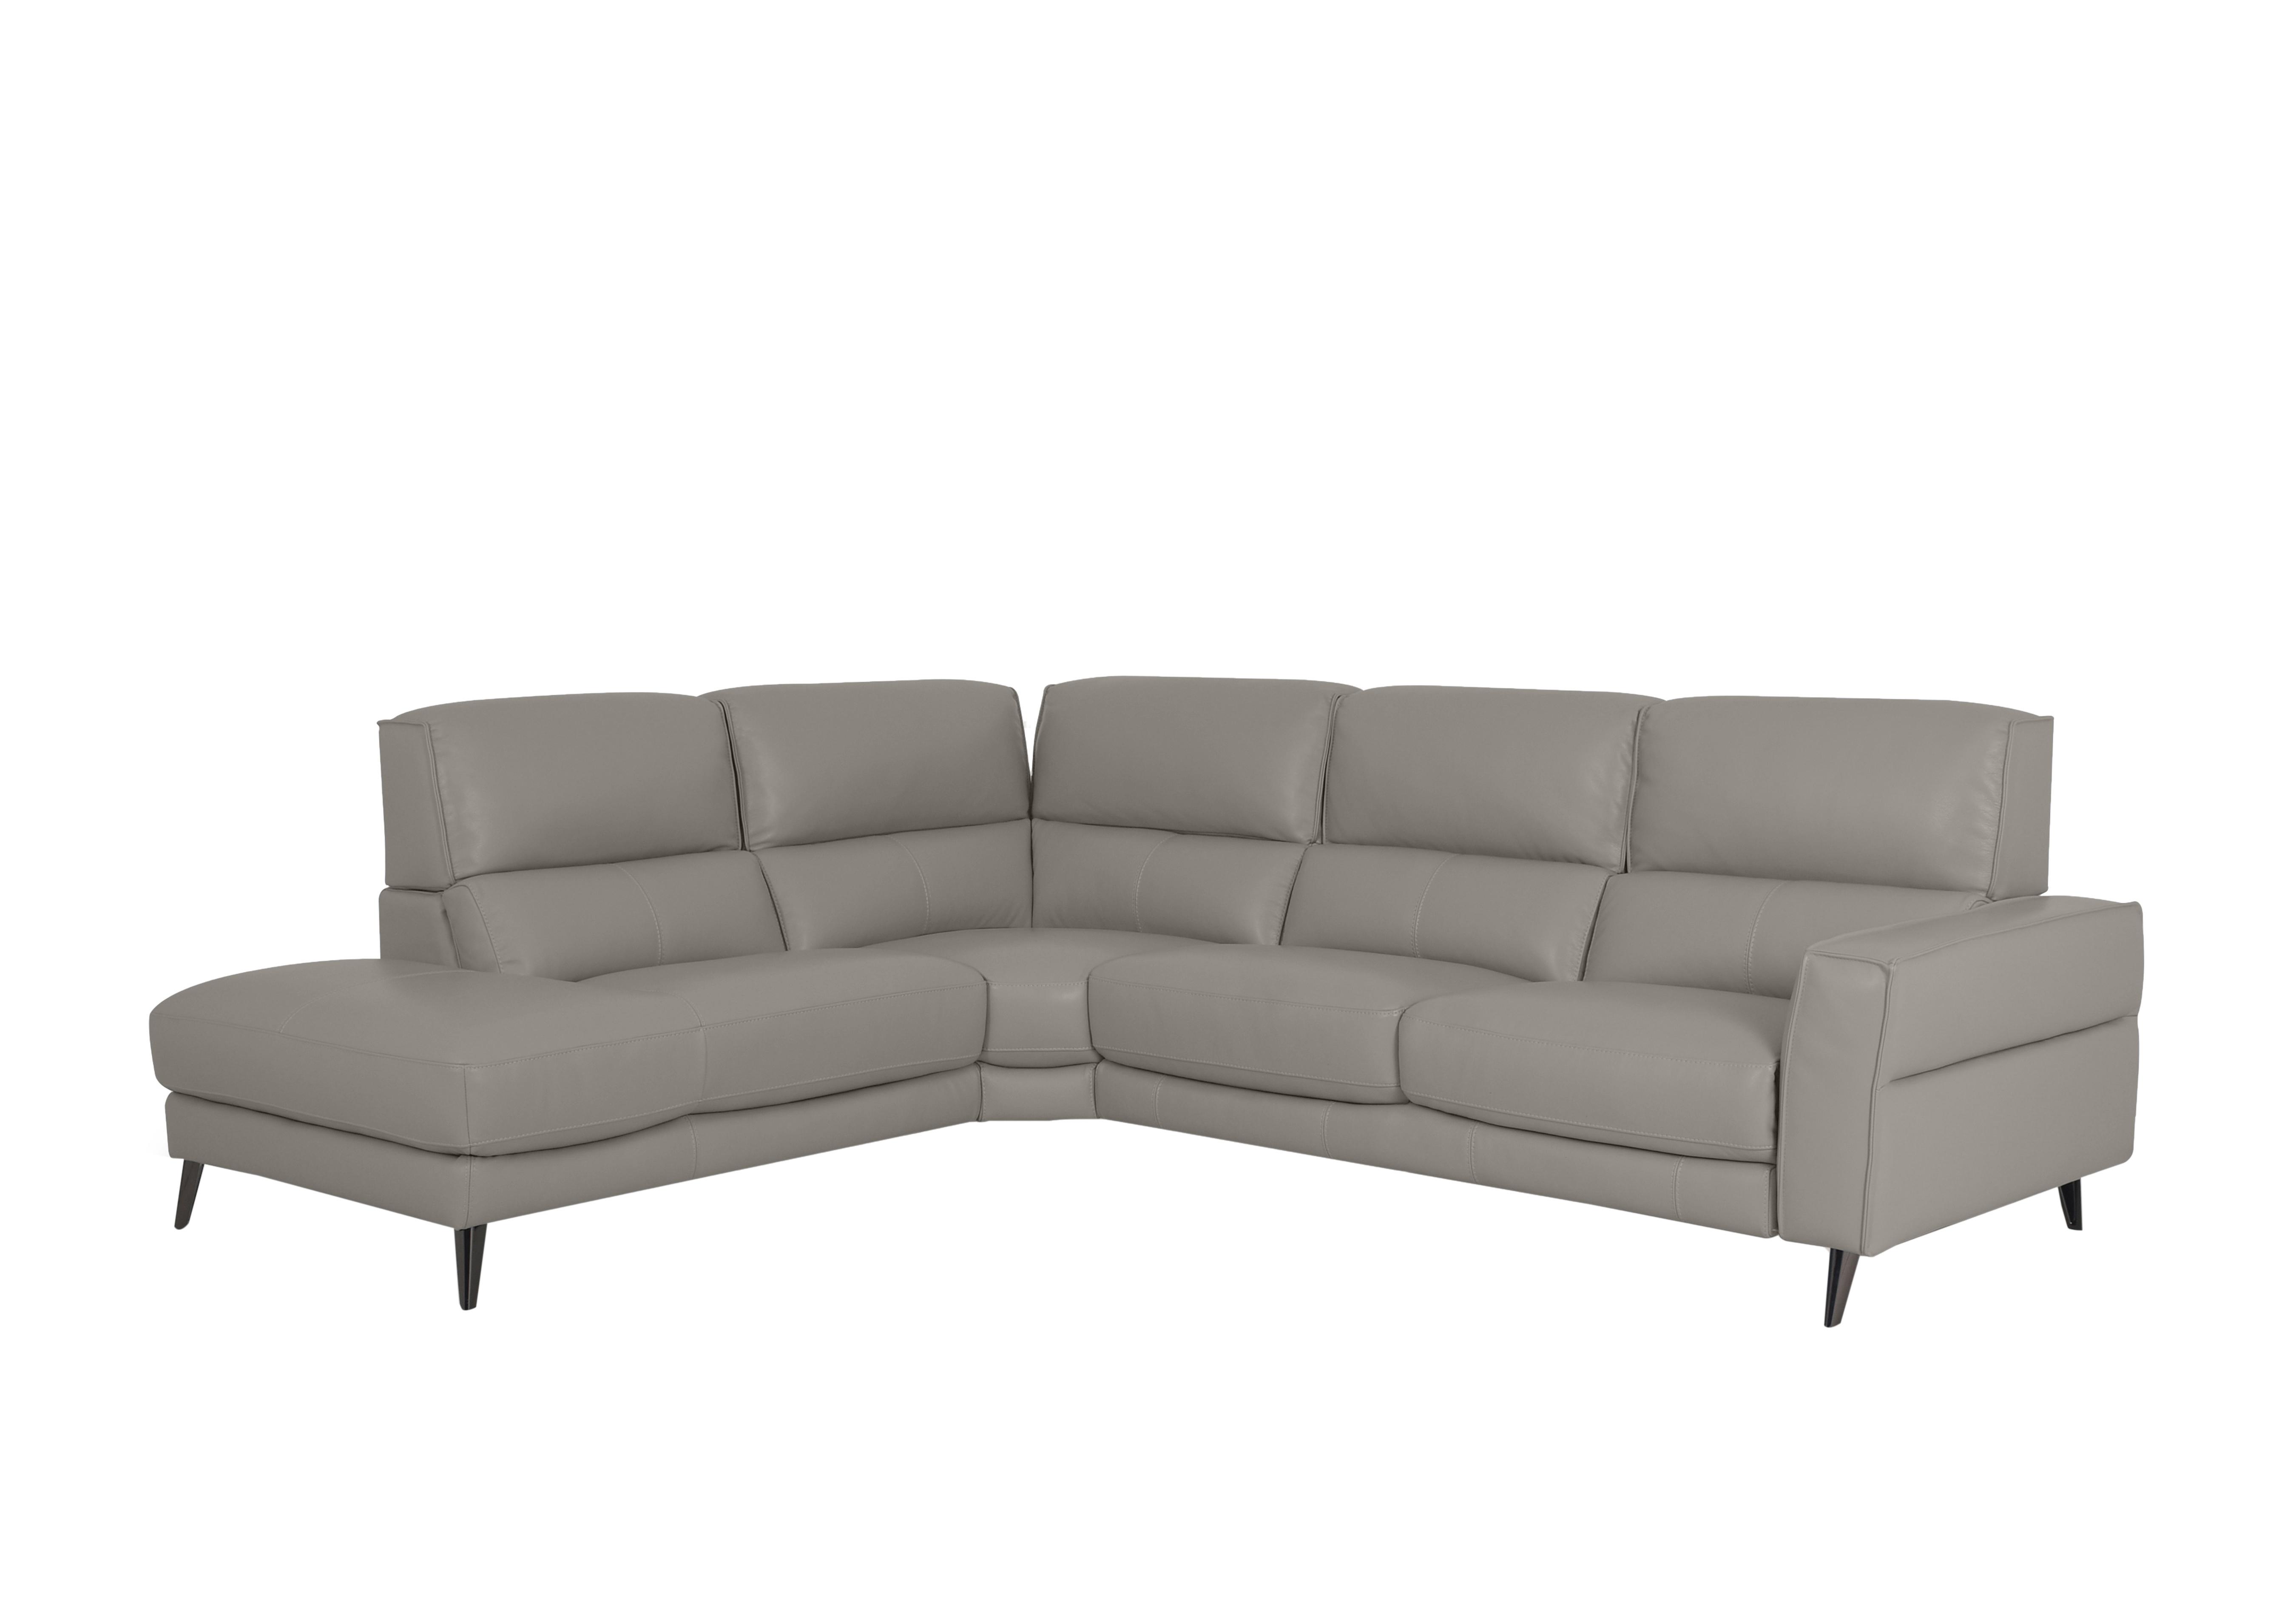 Axel Leather Chaise End Sofa in Bv-946b Silver Grey on Furniture Village